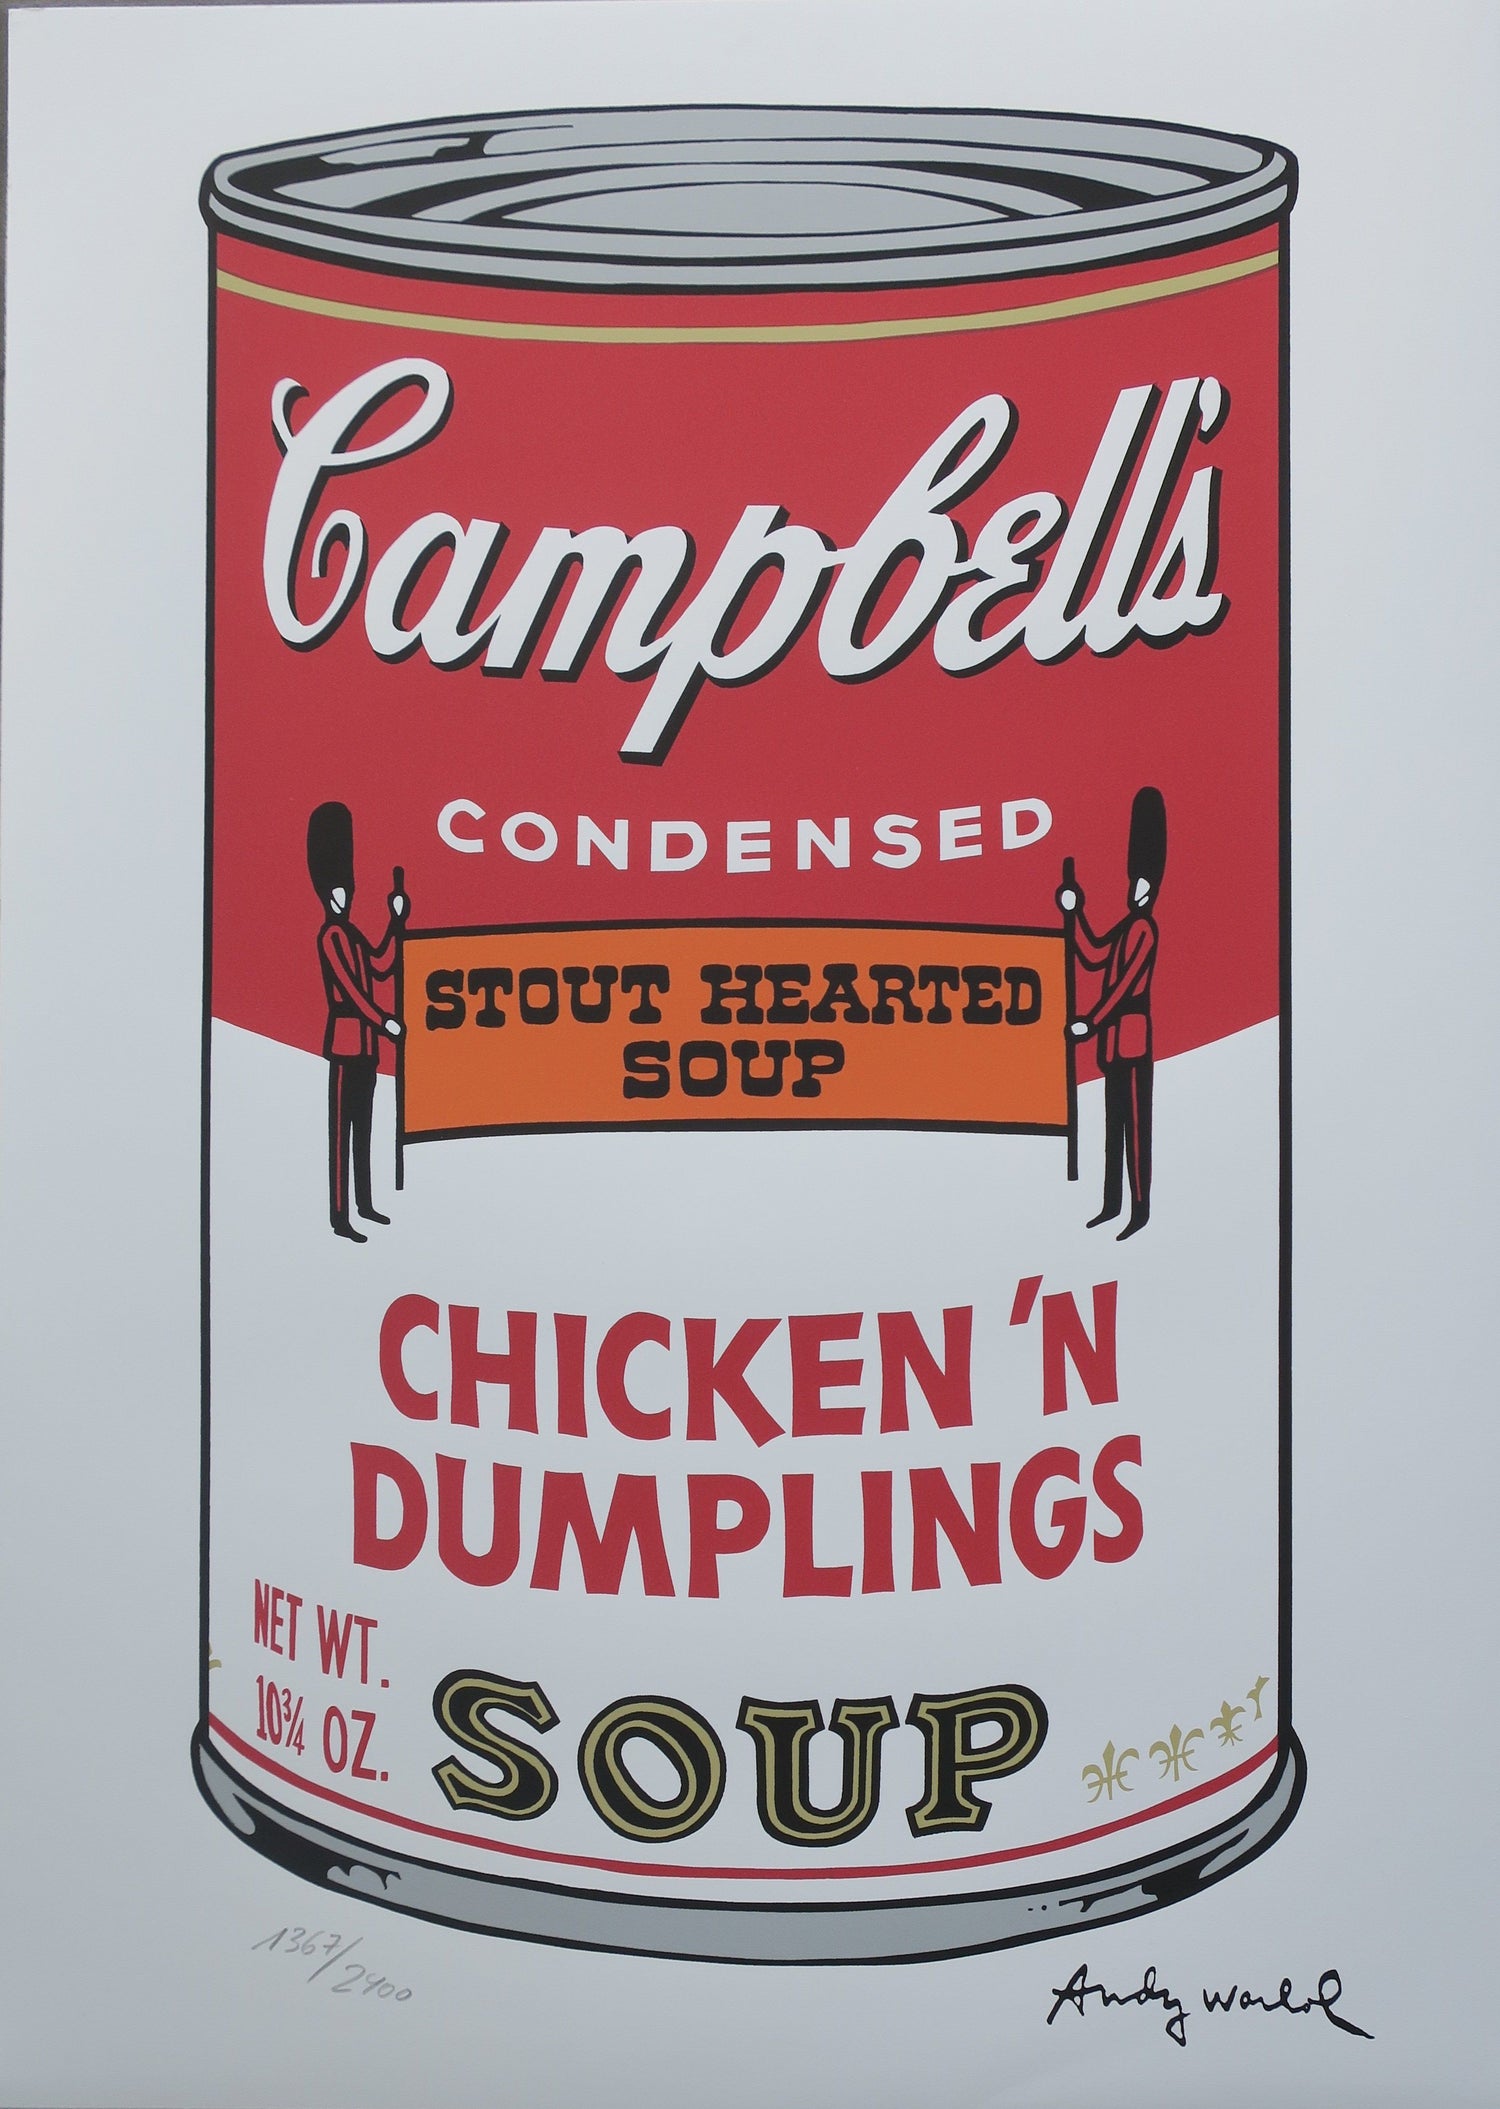 Andy Warhol Campbell's Soup Cheicken n dumplings lithograph